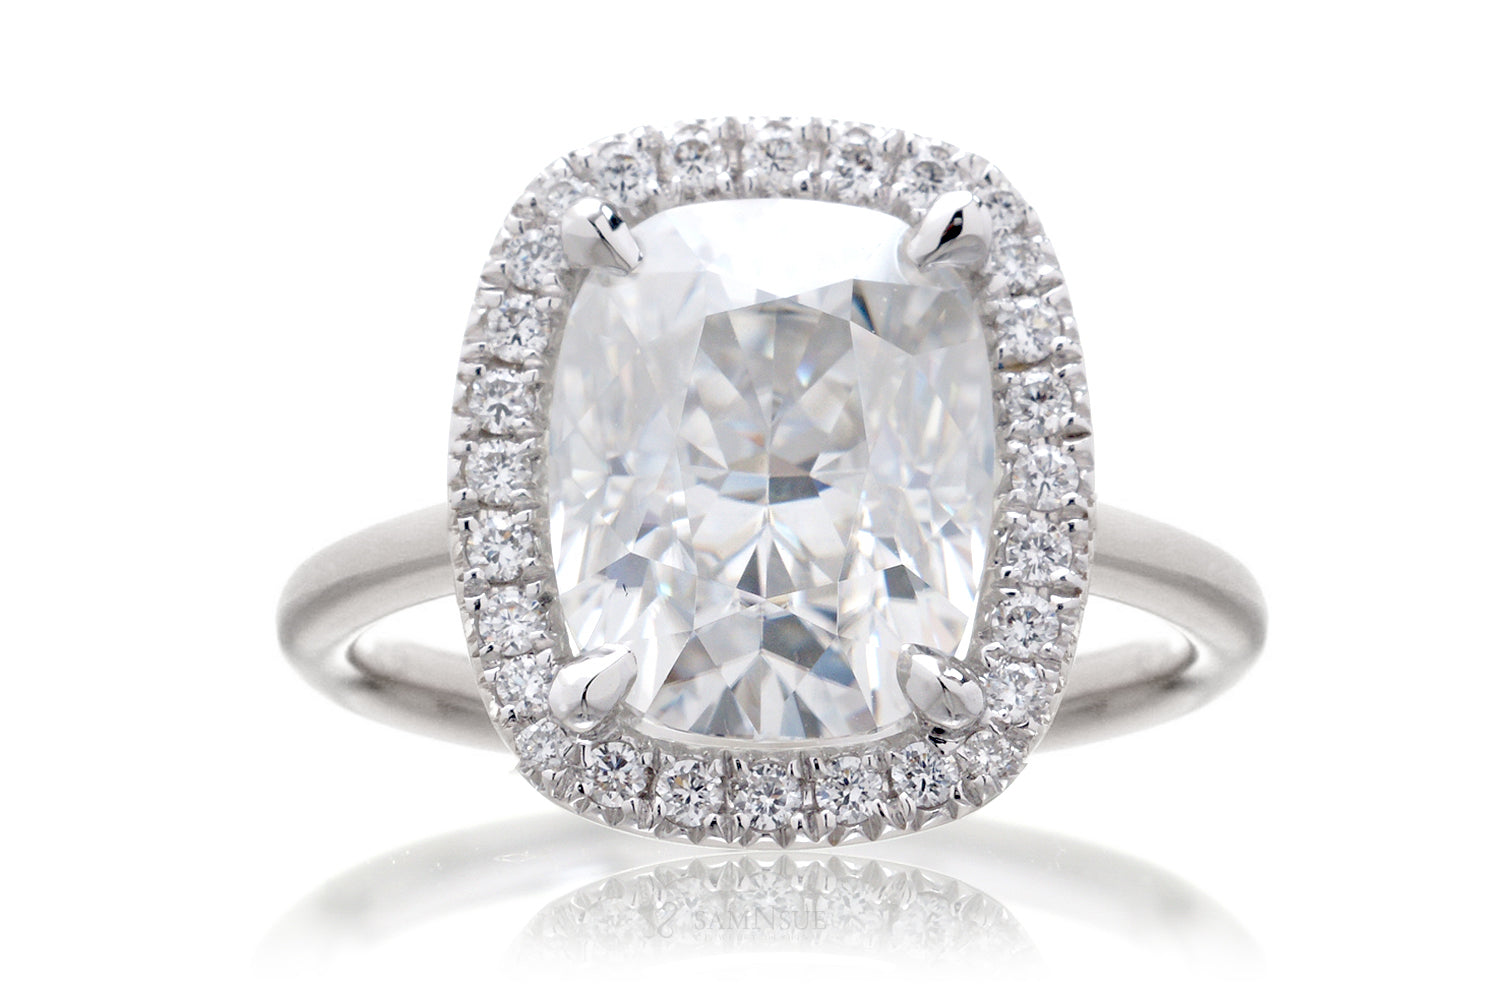 The Drenched Cushion Moissanite